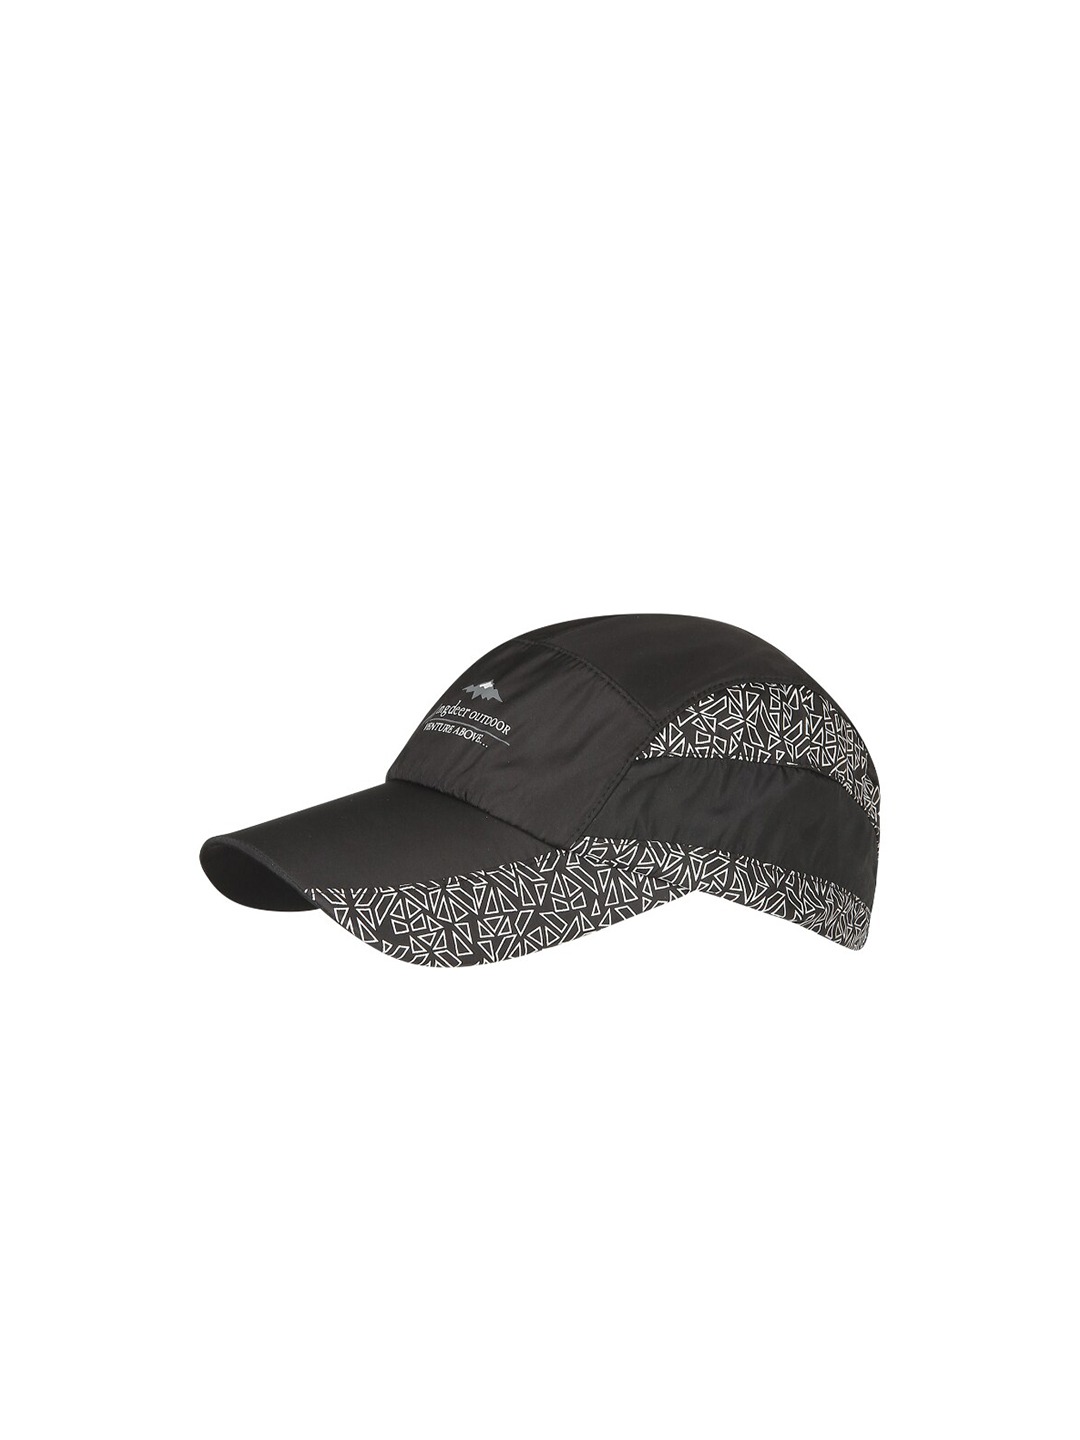 Accessories Caps | iSWEVEN Black & White Printed Snapback Cap - OX44311